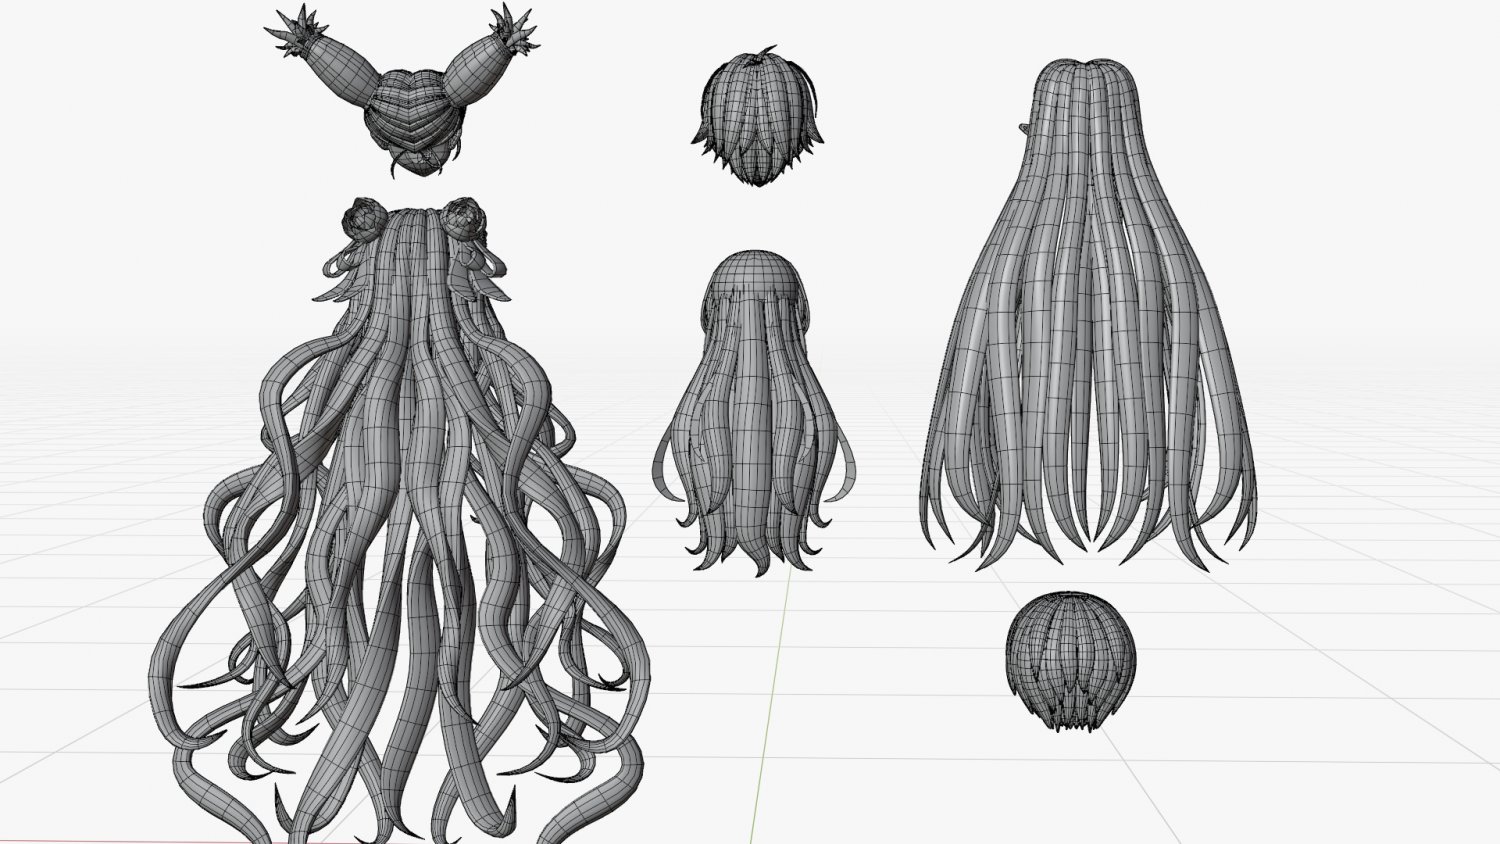 42,440 Anime Hair Images, Stock Photos, 3D objects, & Vectors